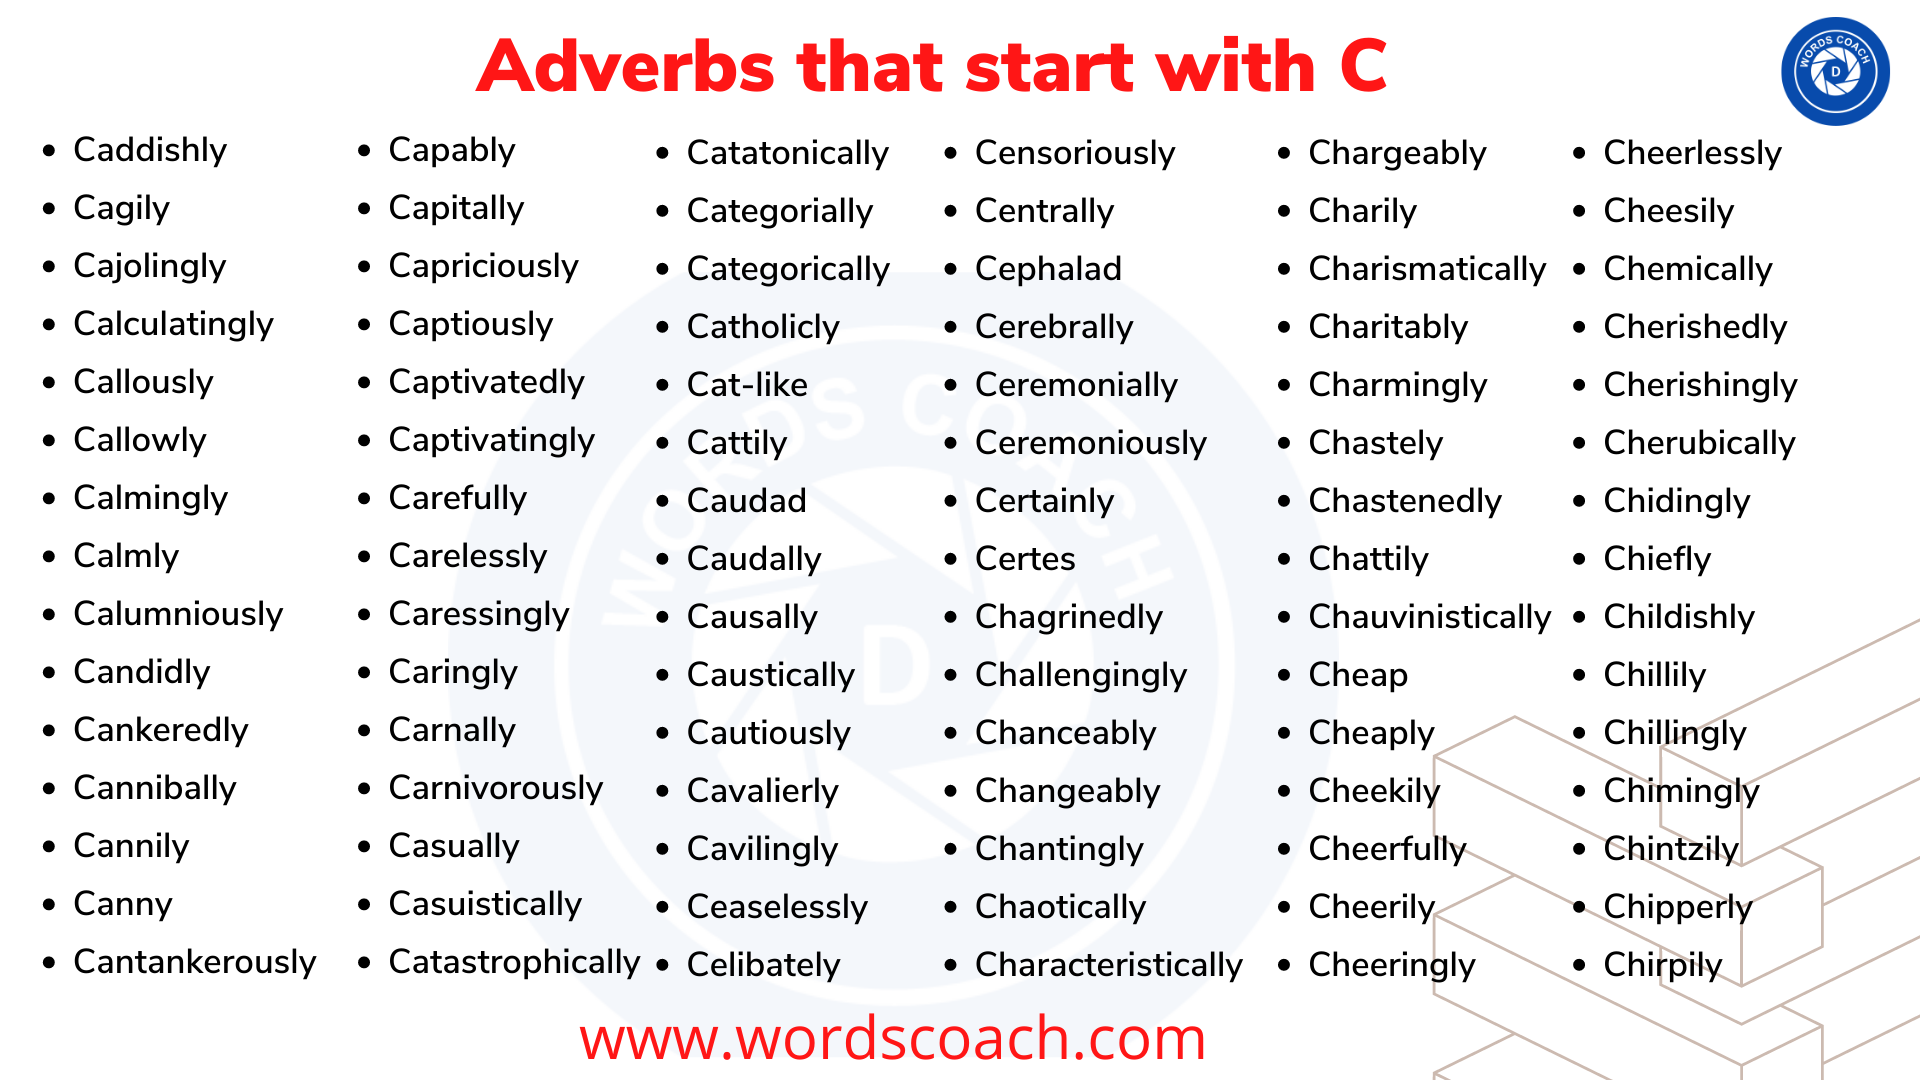 Adverbs that start with C - wordscoach.com